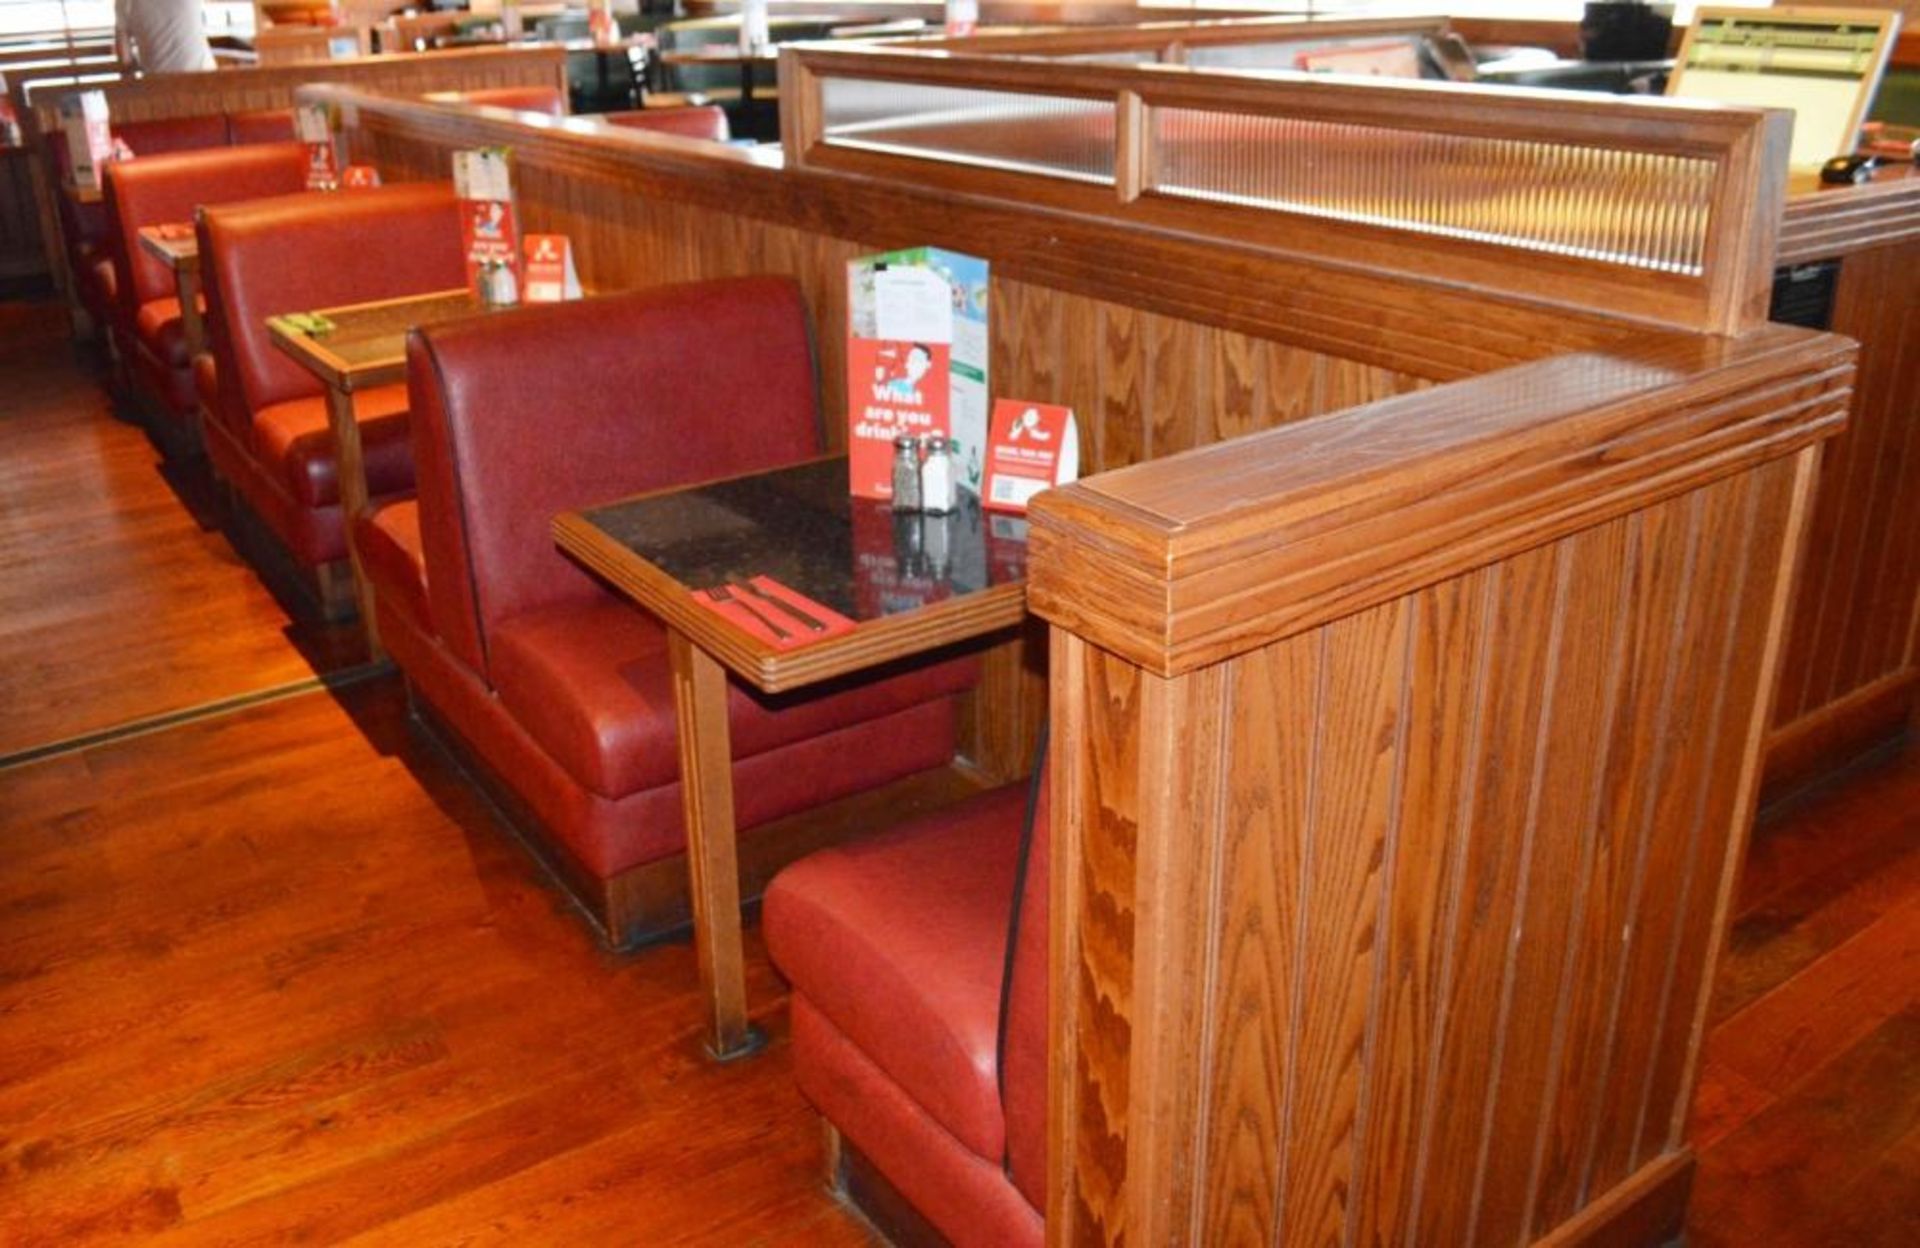 1 x Selection of Cosy Bespoke Seating Booths in a 1950's Retro American Diner Design With Dining Tab - Image 10 of 30